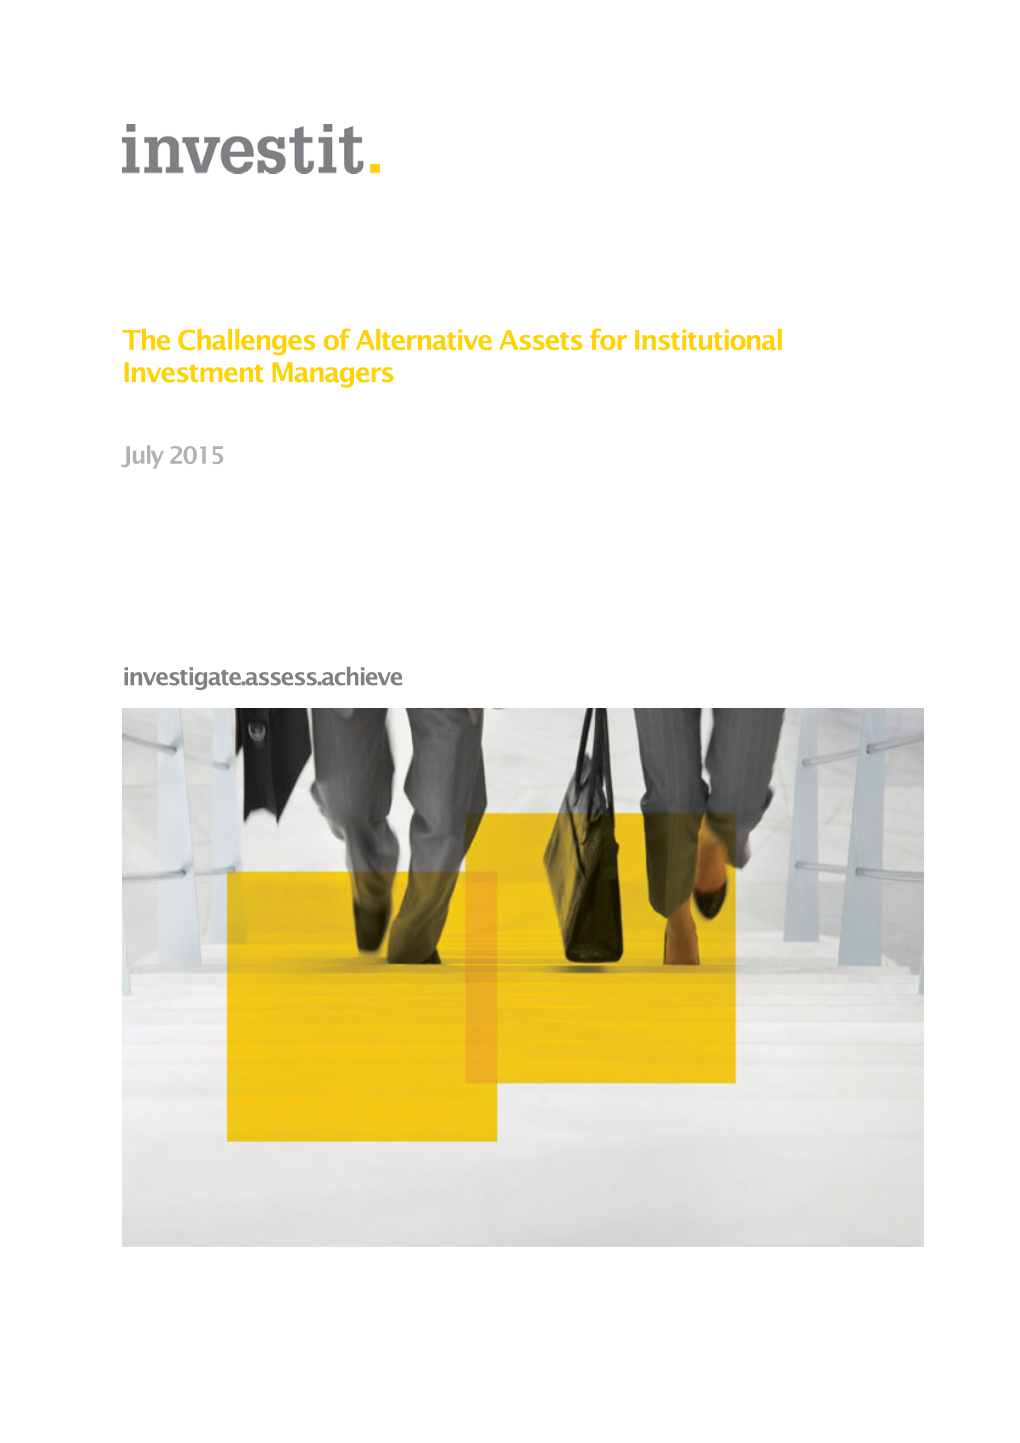 The Challenges of Alternative Assets for Institutional Investment Managers